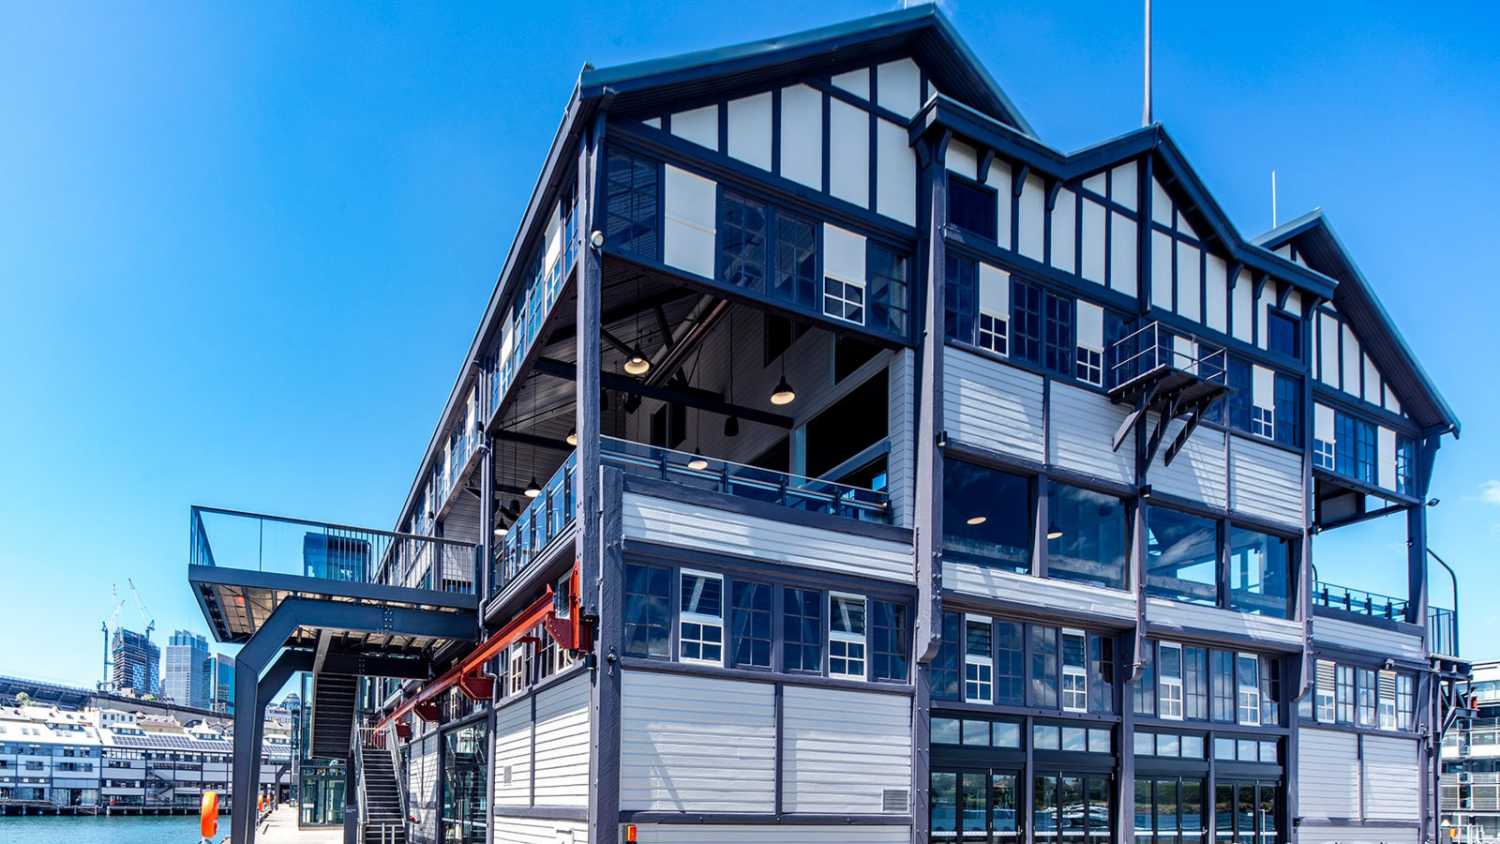 The Wharf at Walsh Bay has undergone a total renovation